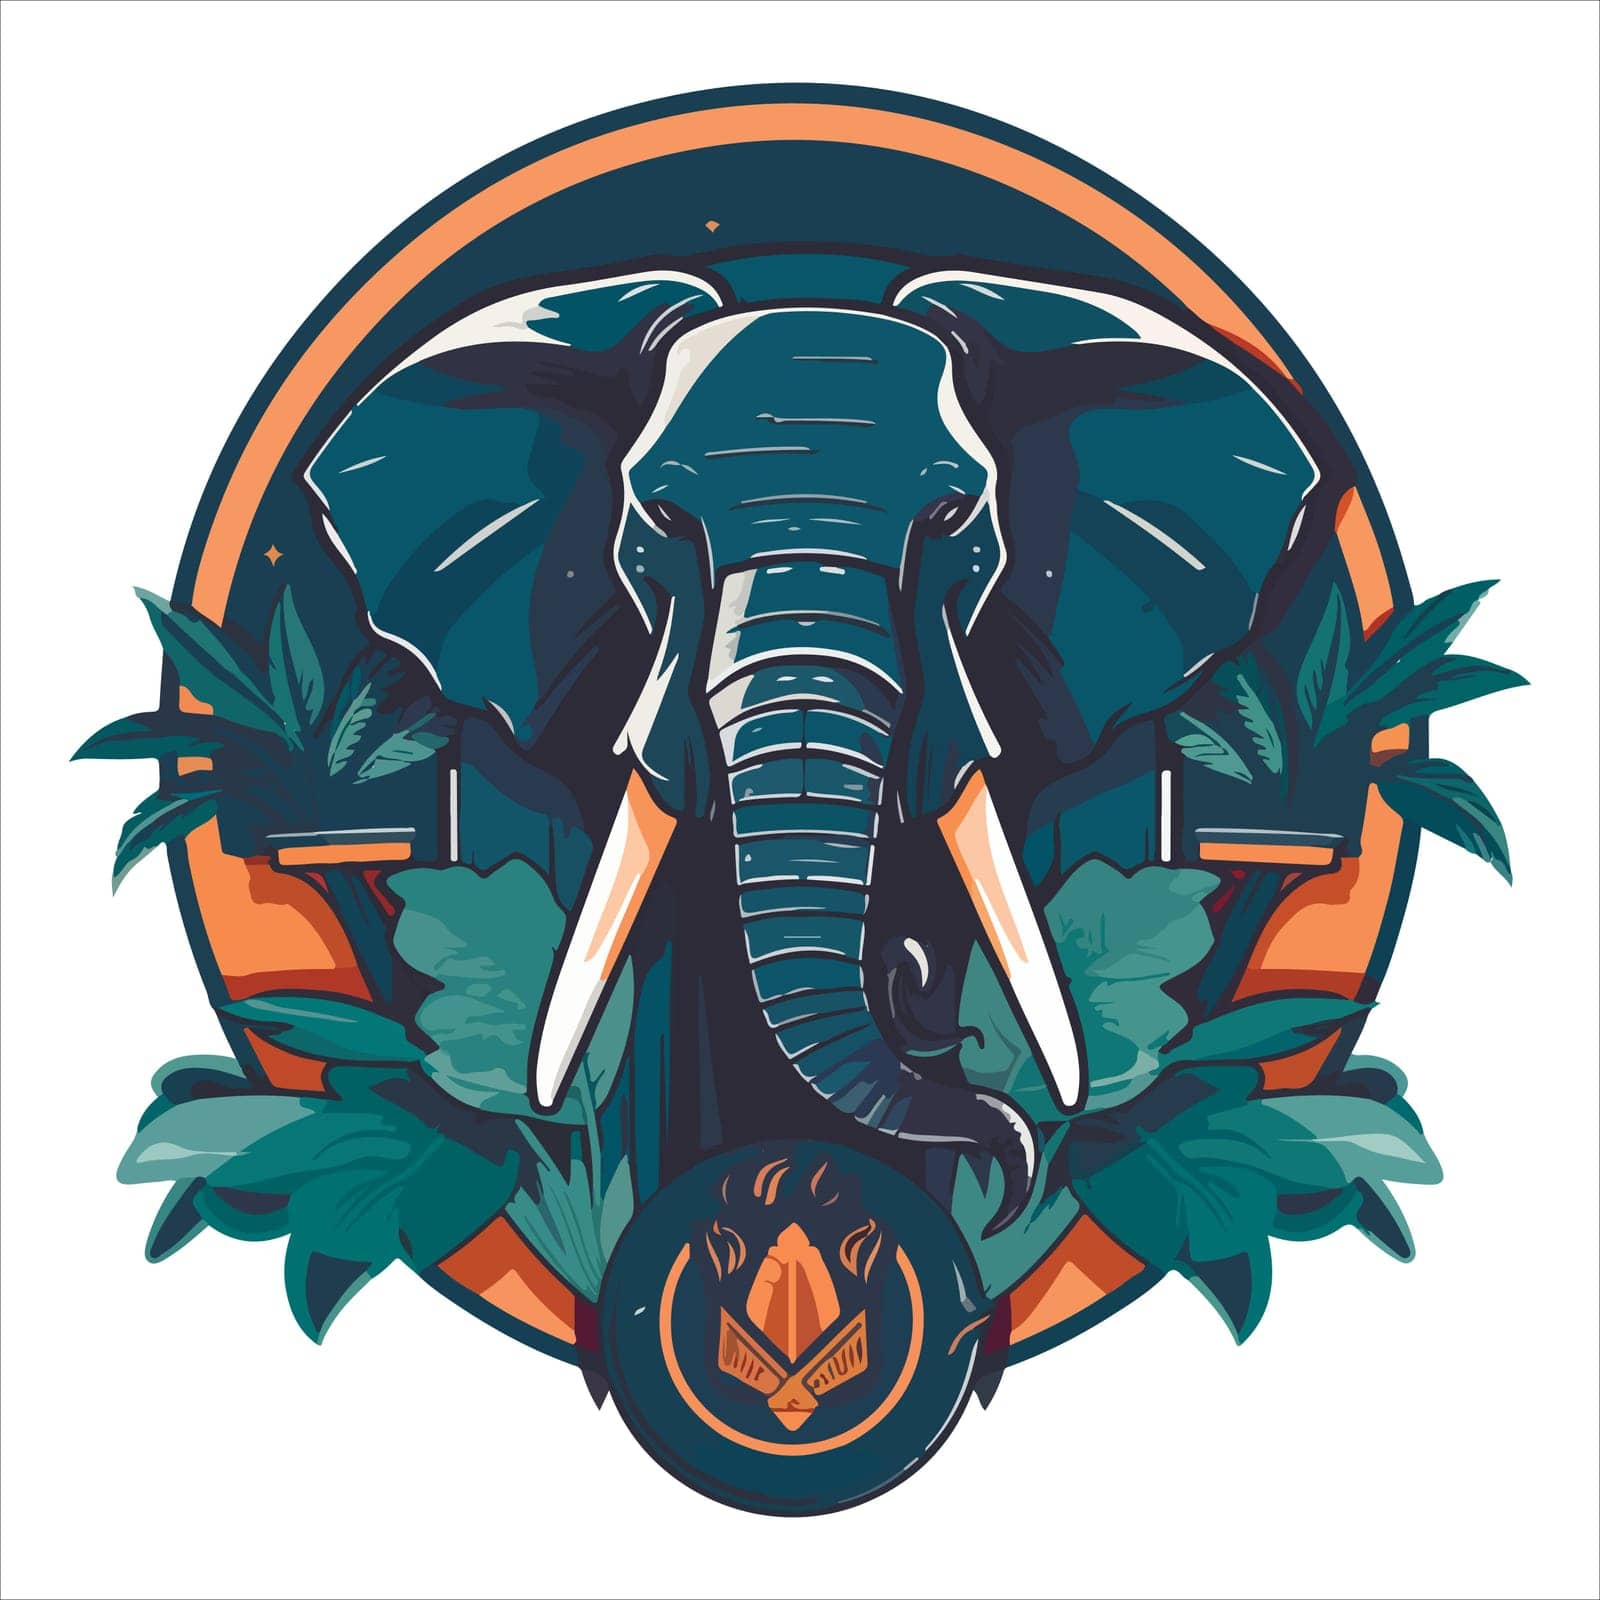 elephant mascot logo design vector with modern illustration concept style for badge, emblem and tshirt printing. angry elephant illustration with feet up.